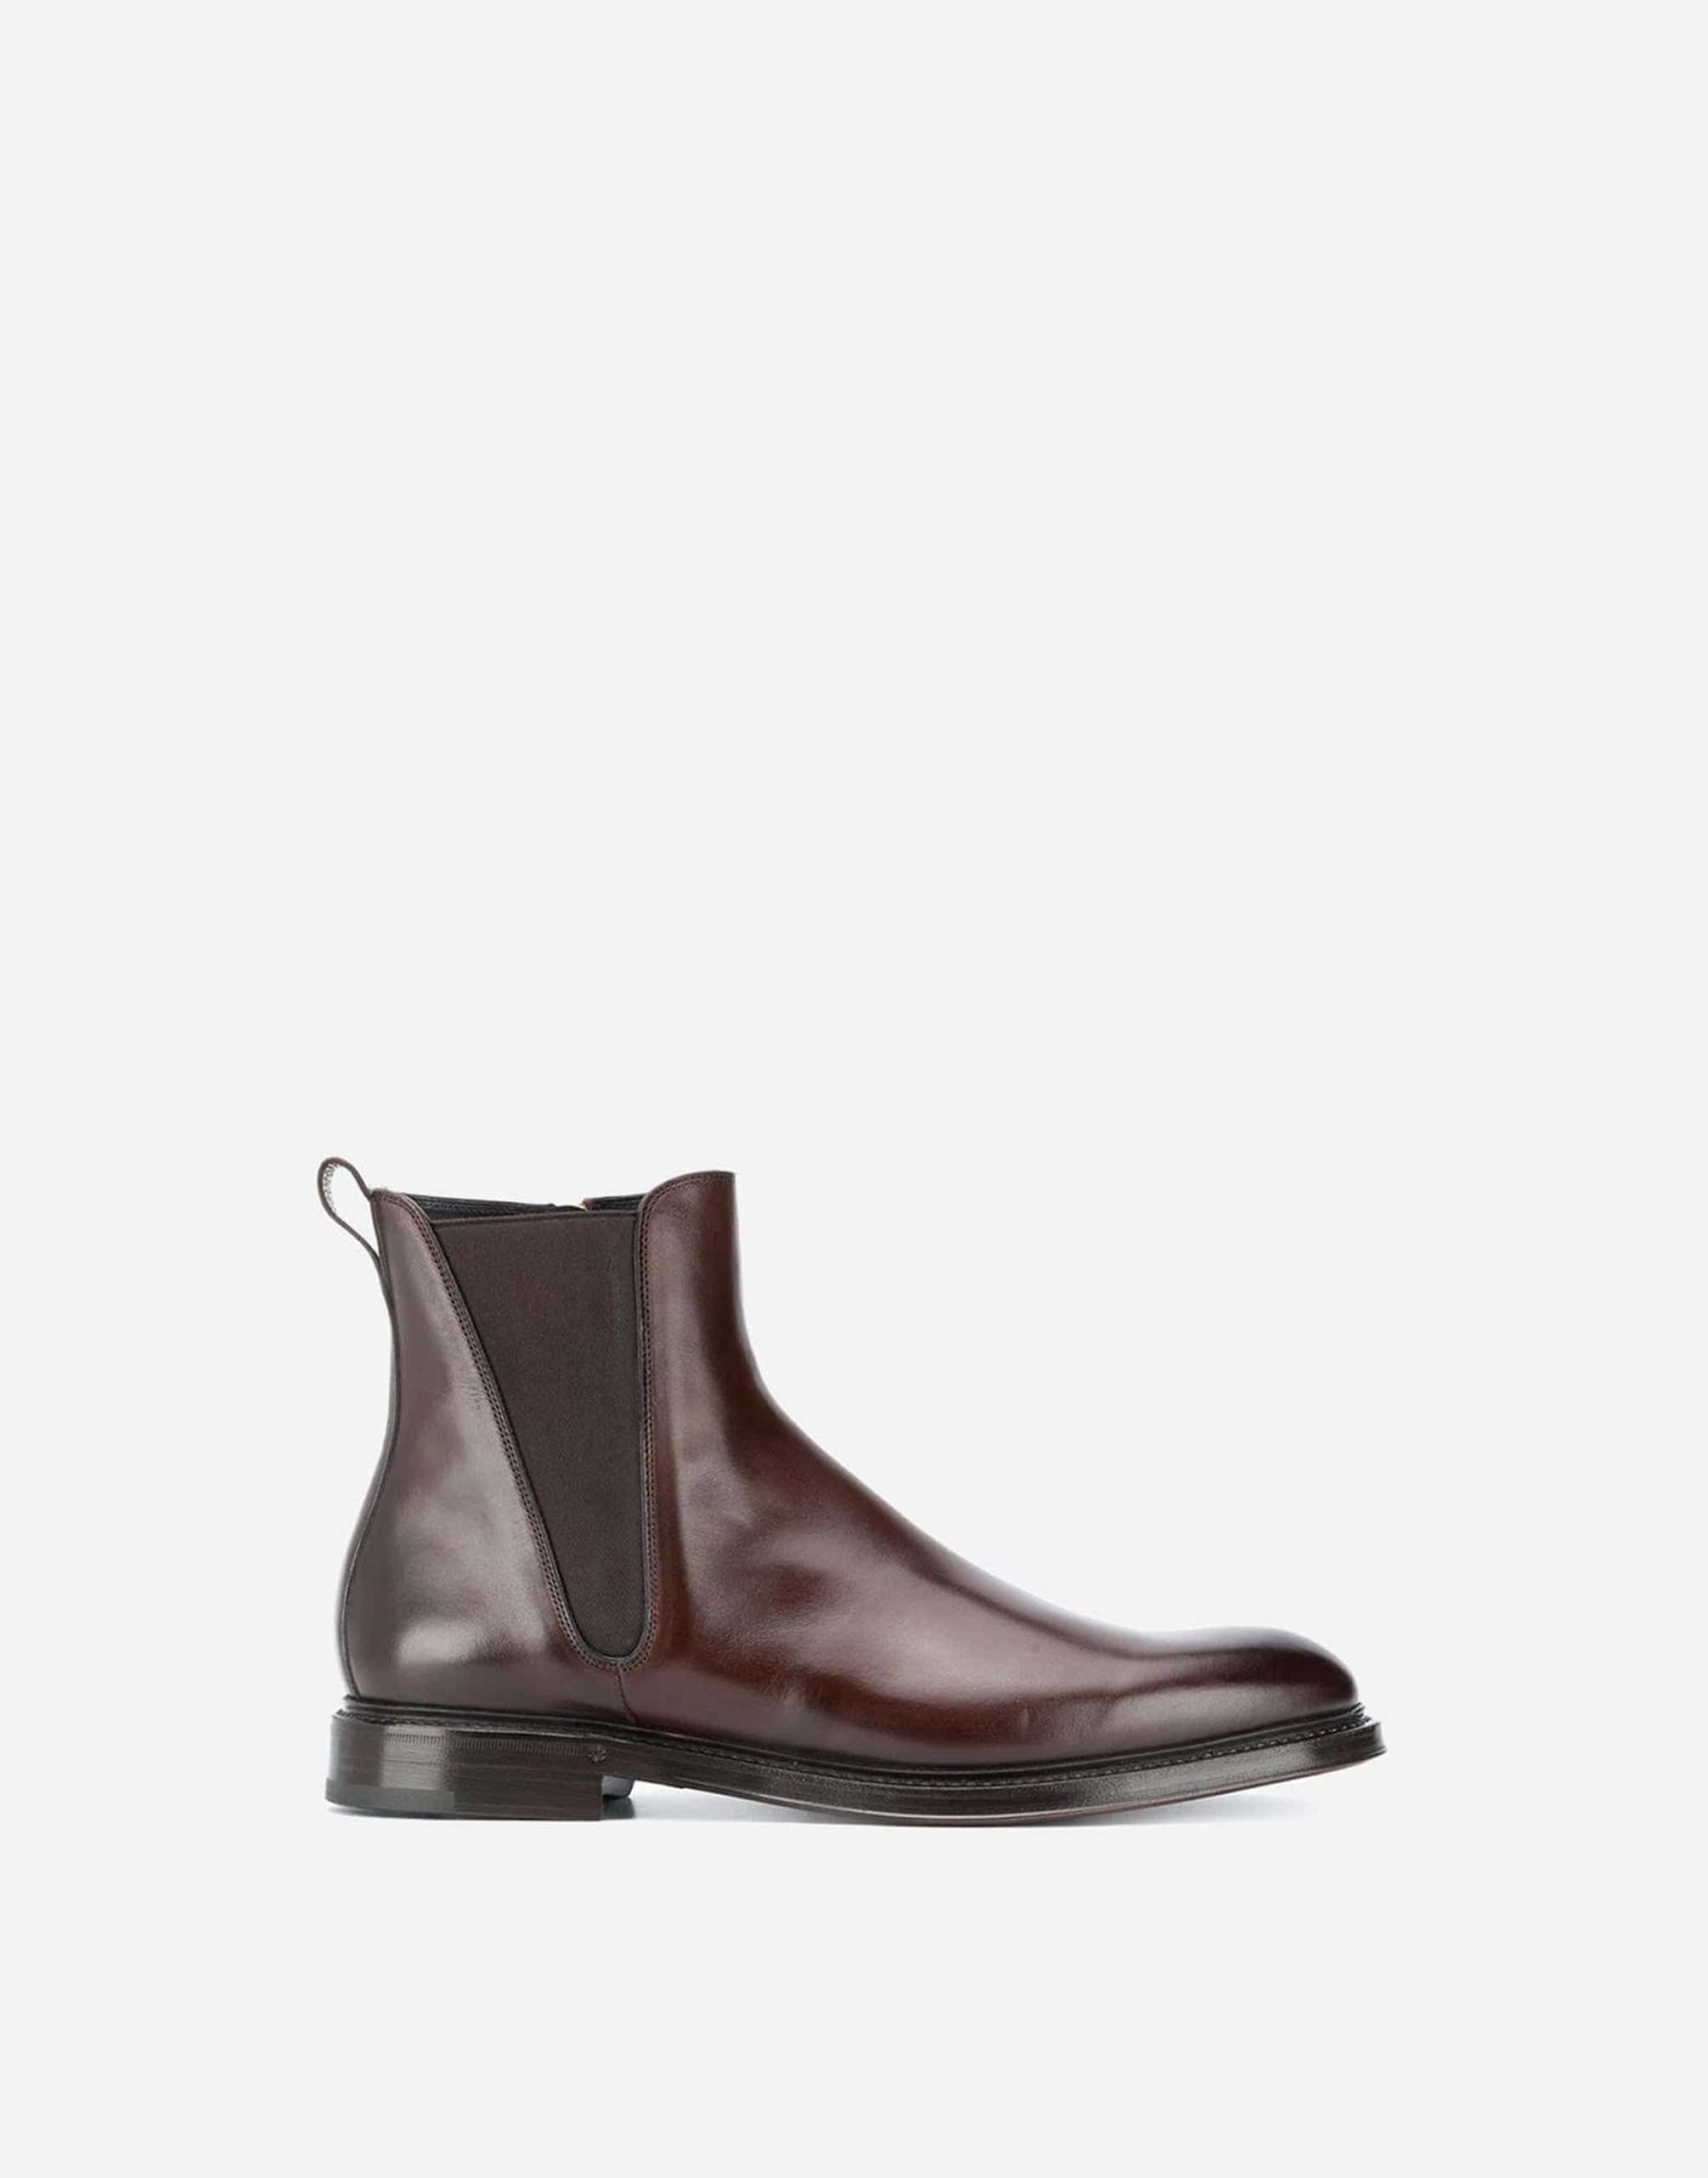 Dolce & Gabbana Chelsea Ankle Boots